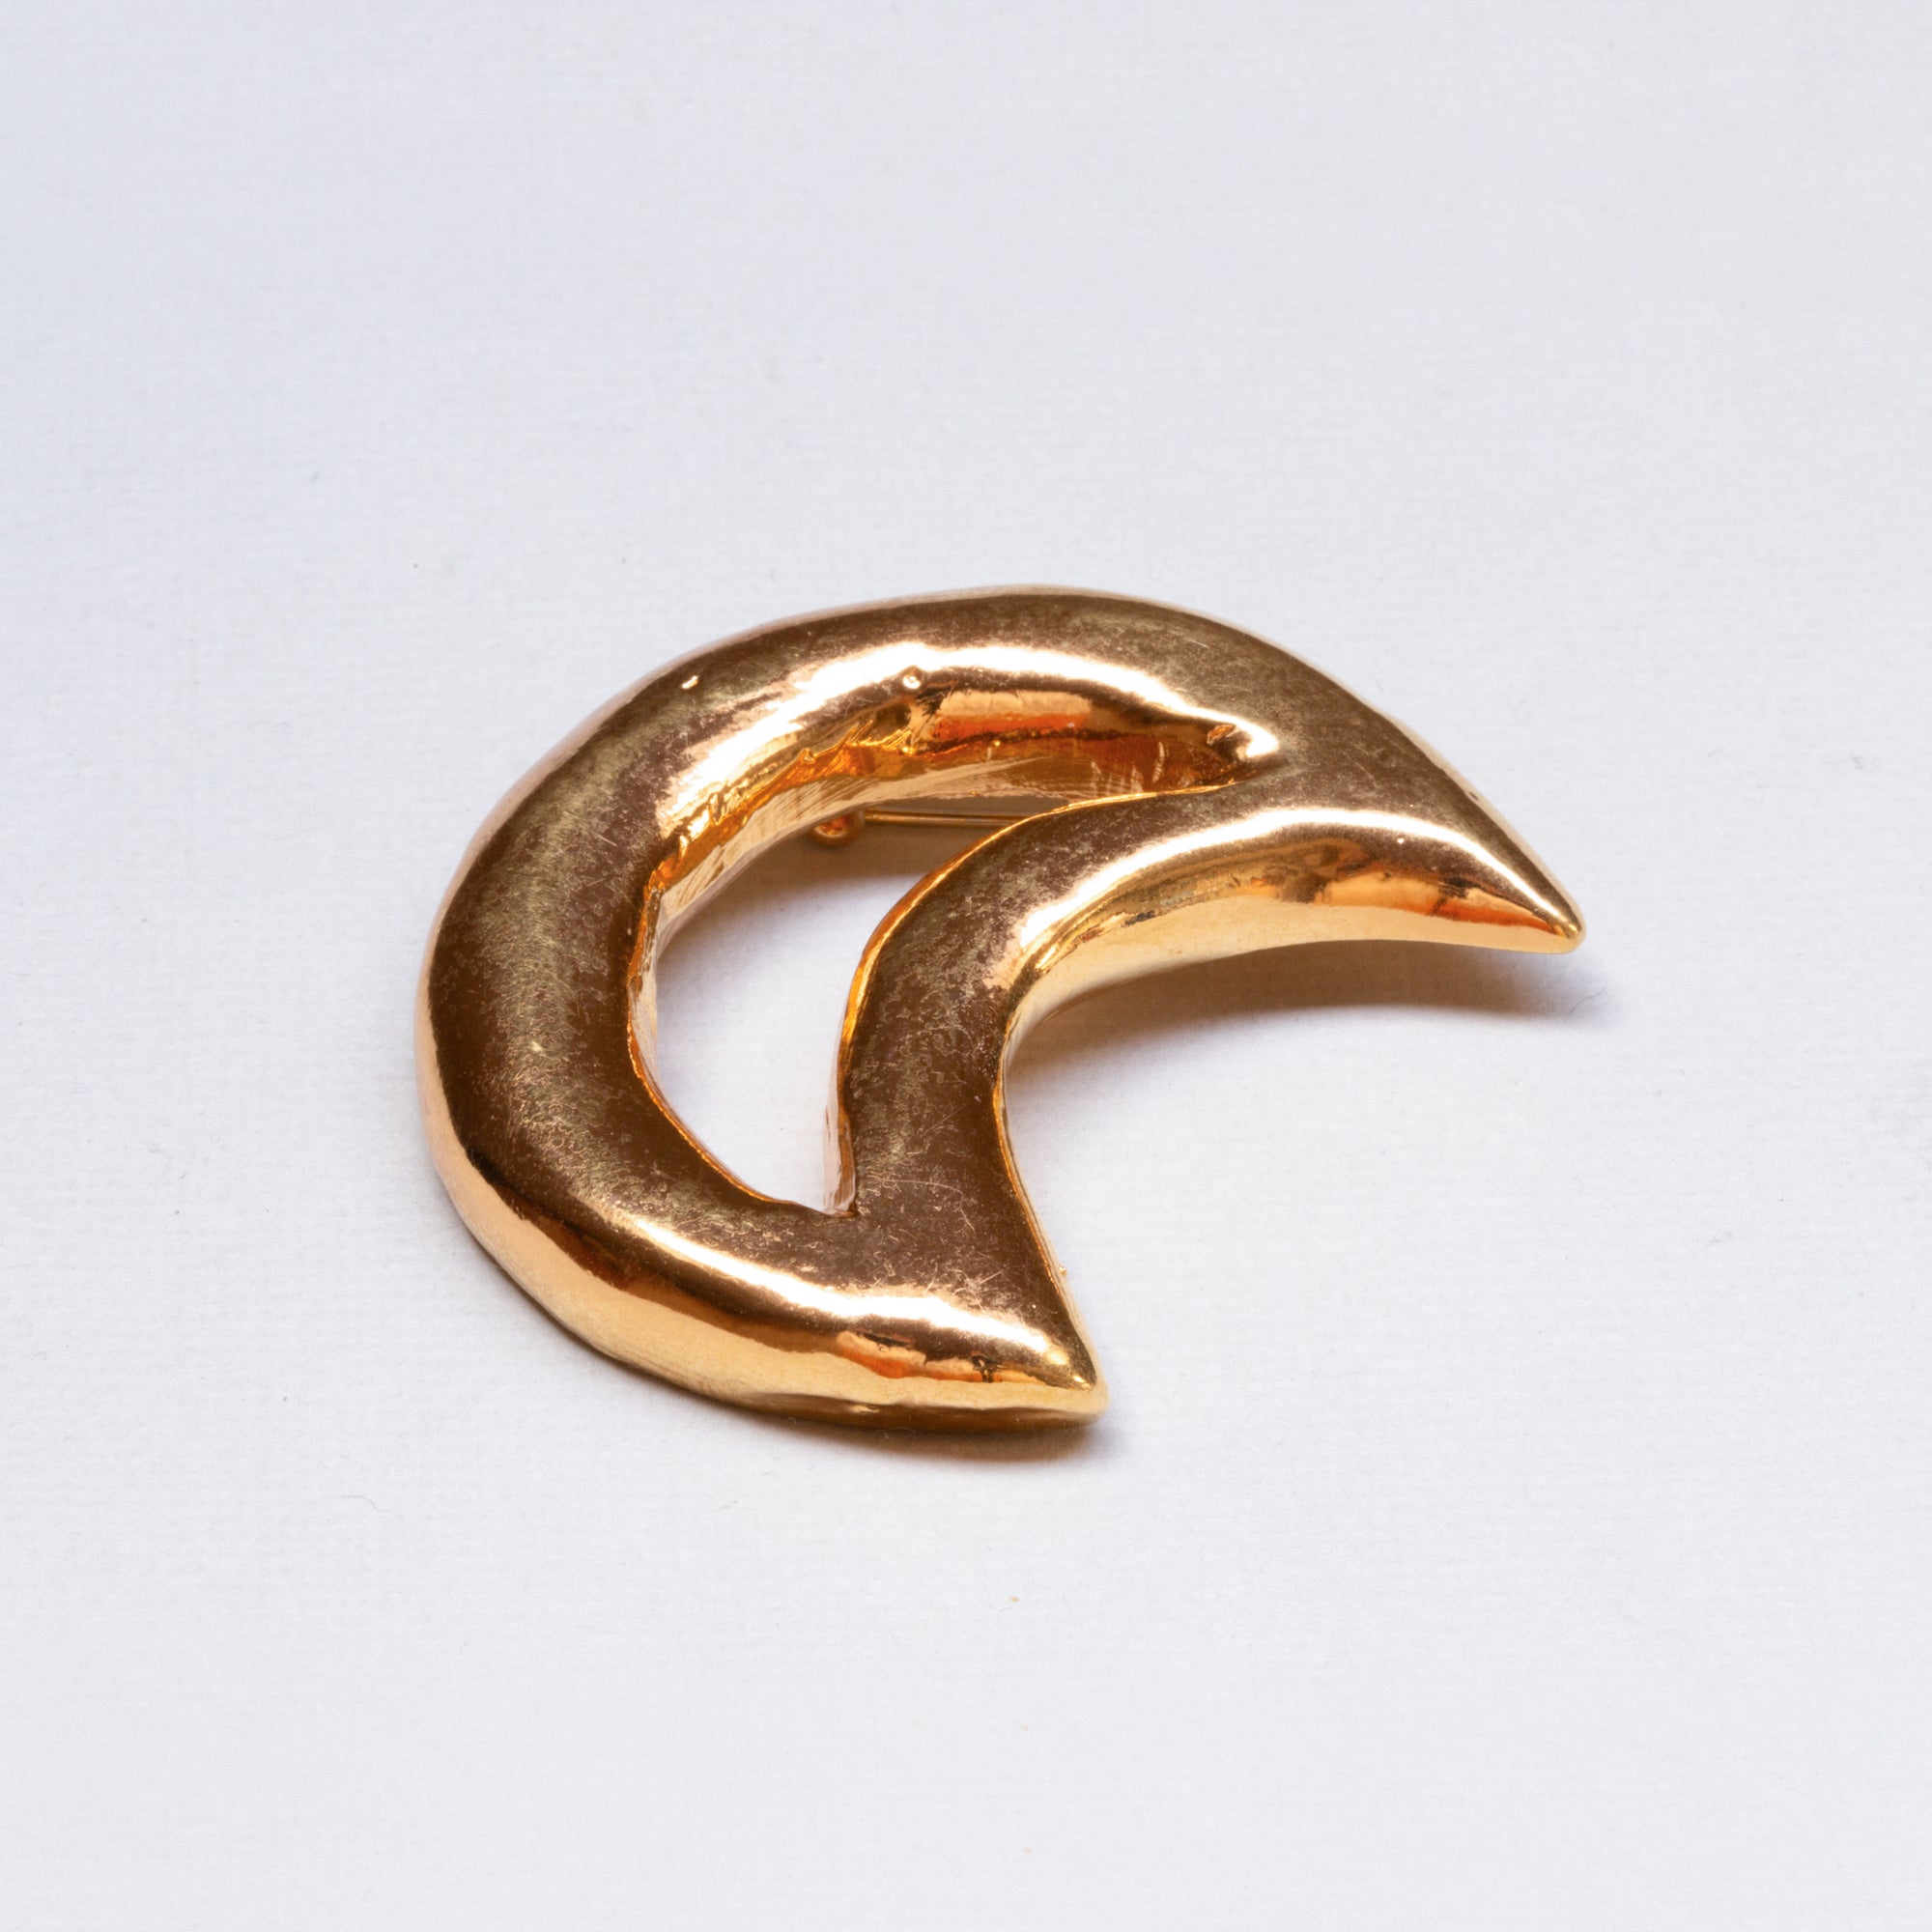 Vintage Christian Lacroix Gold Moon Brooch